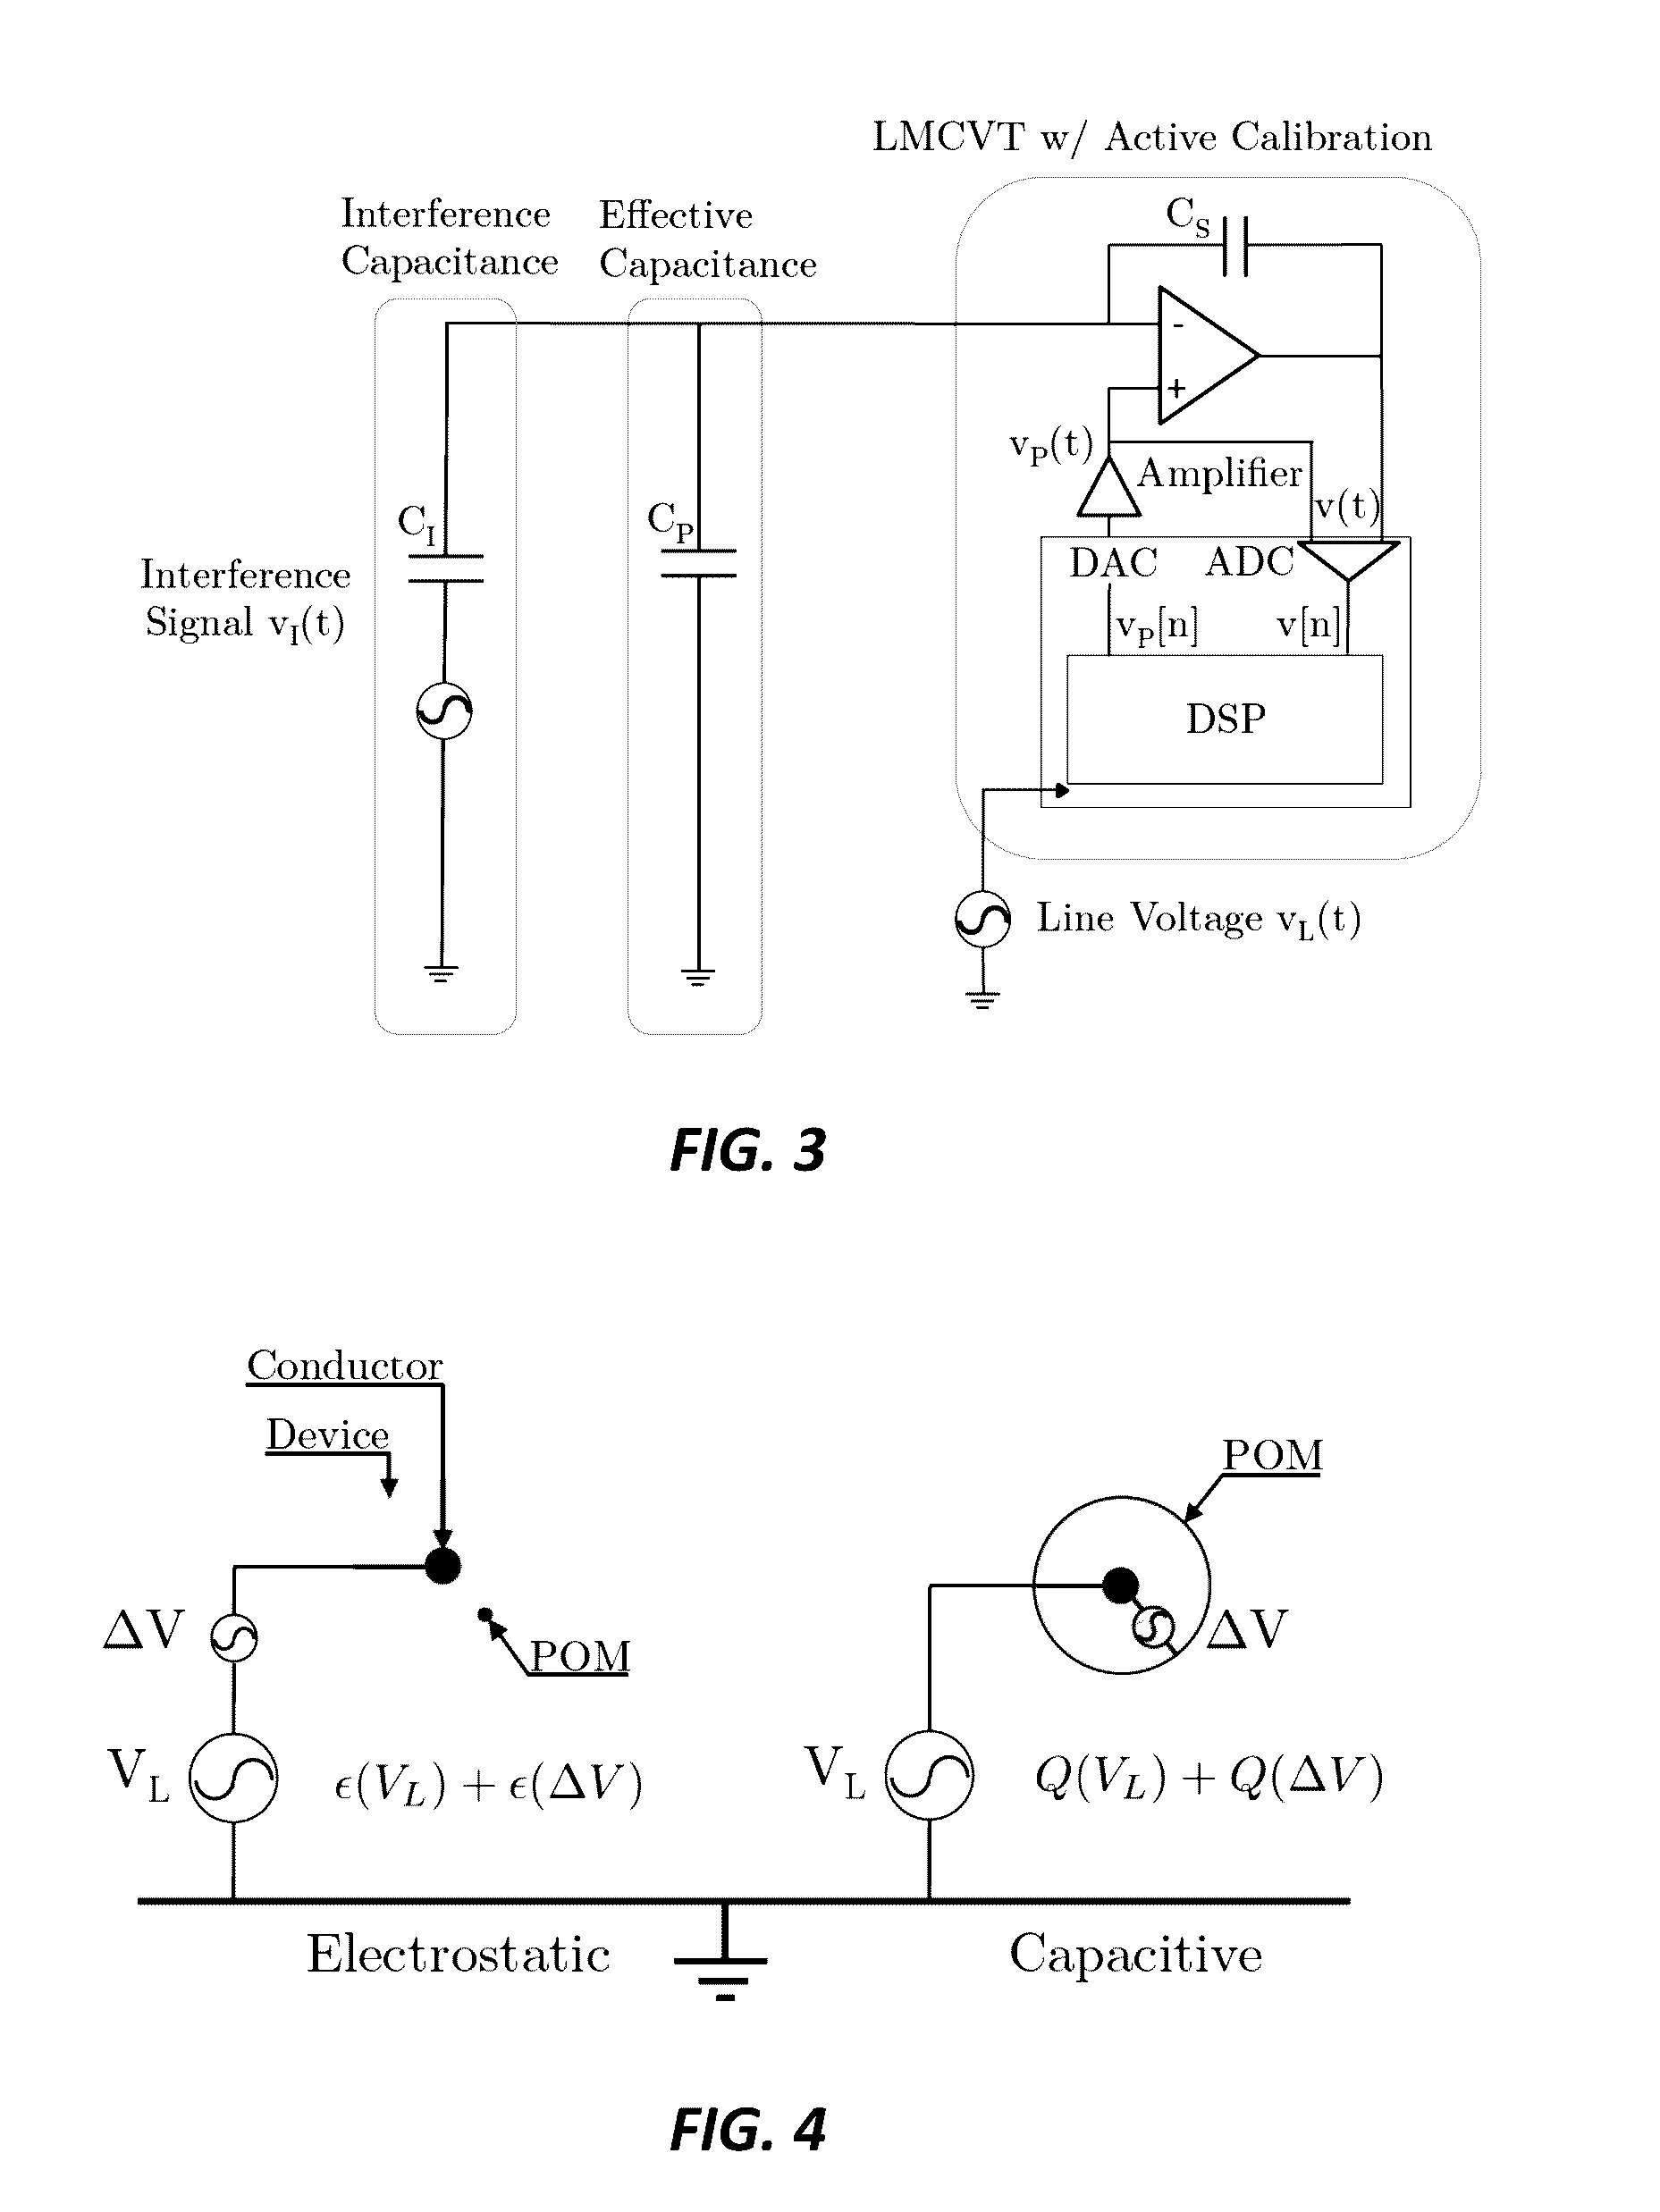 Actively Calibrated Capacitively Coupled Electrostatic Device for High Voltage Measurement